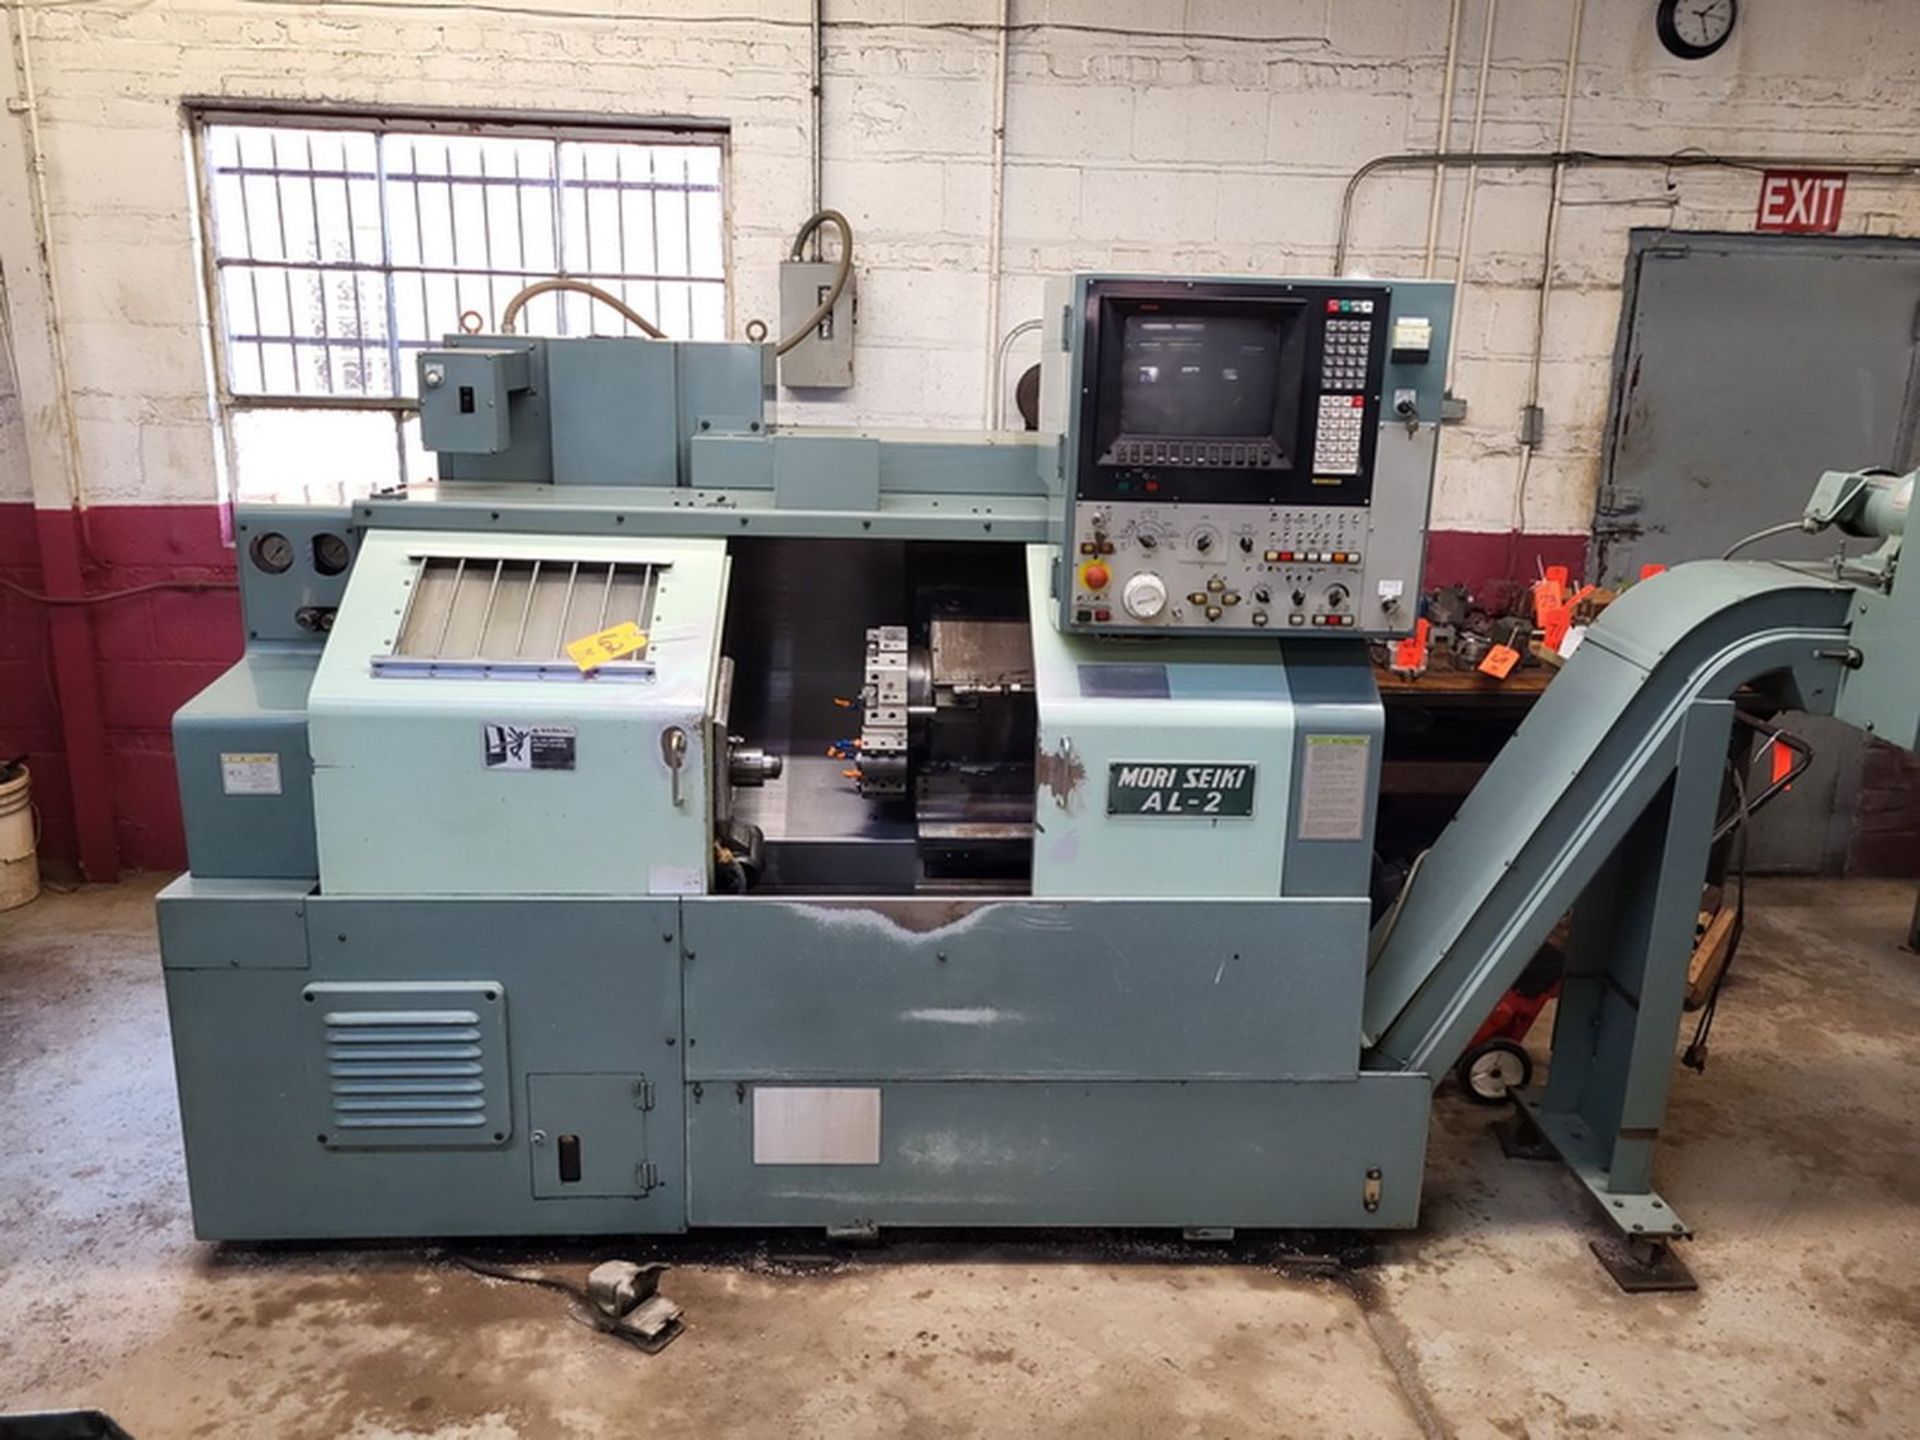 Mori Seiki Model AL-2ATM CNC Lathe, S/N: 937; with 8-Position Turret, Collet Chuck, Tool Setter,